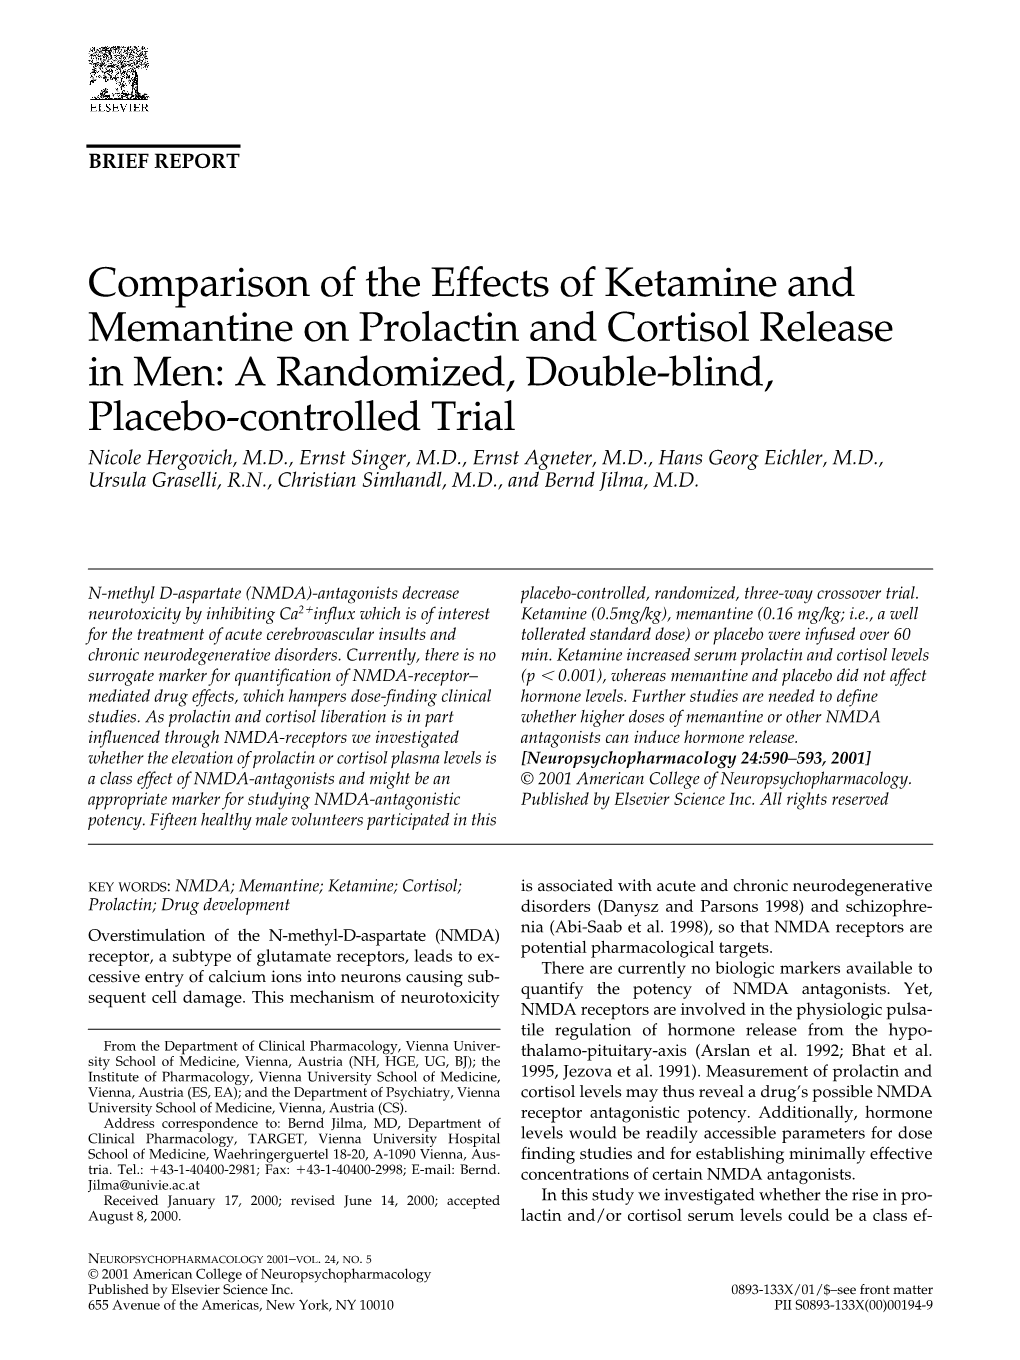 Comparison of the Effects of Ketamine and Memantine on Prolactin And